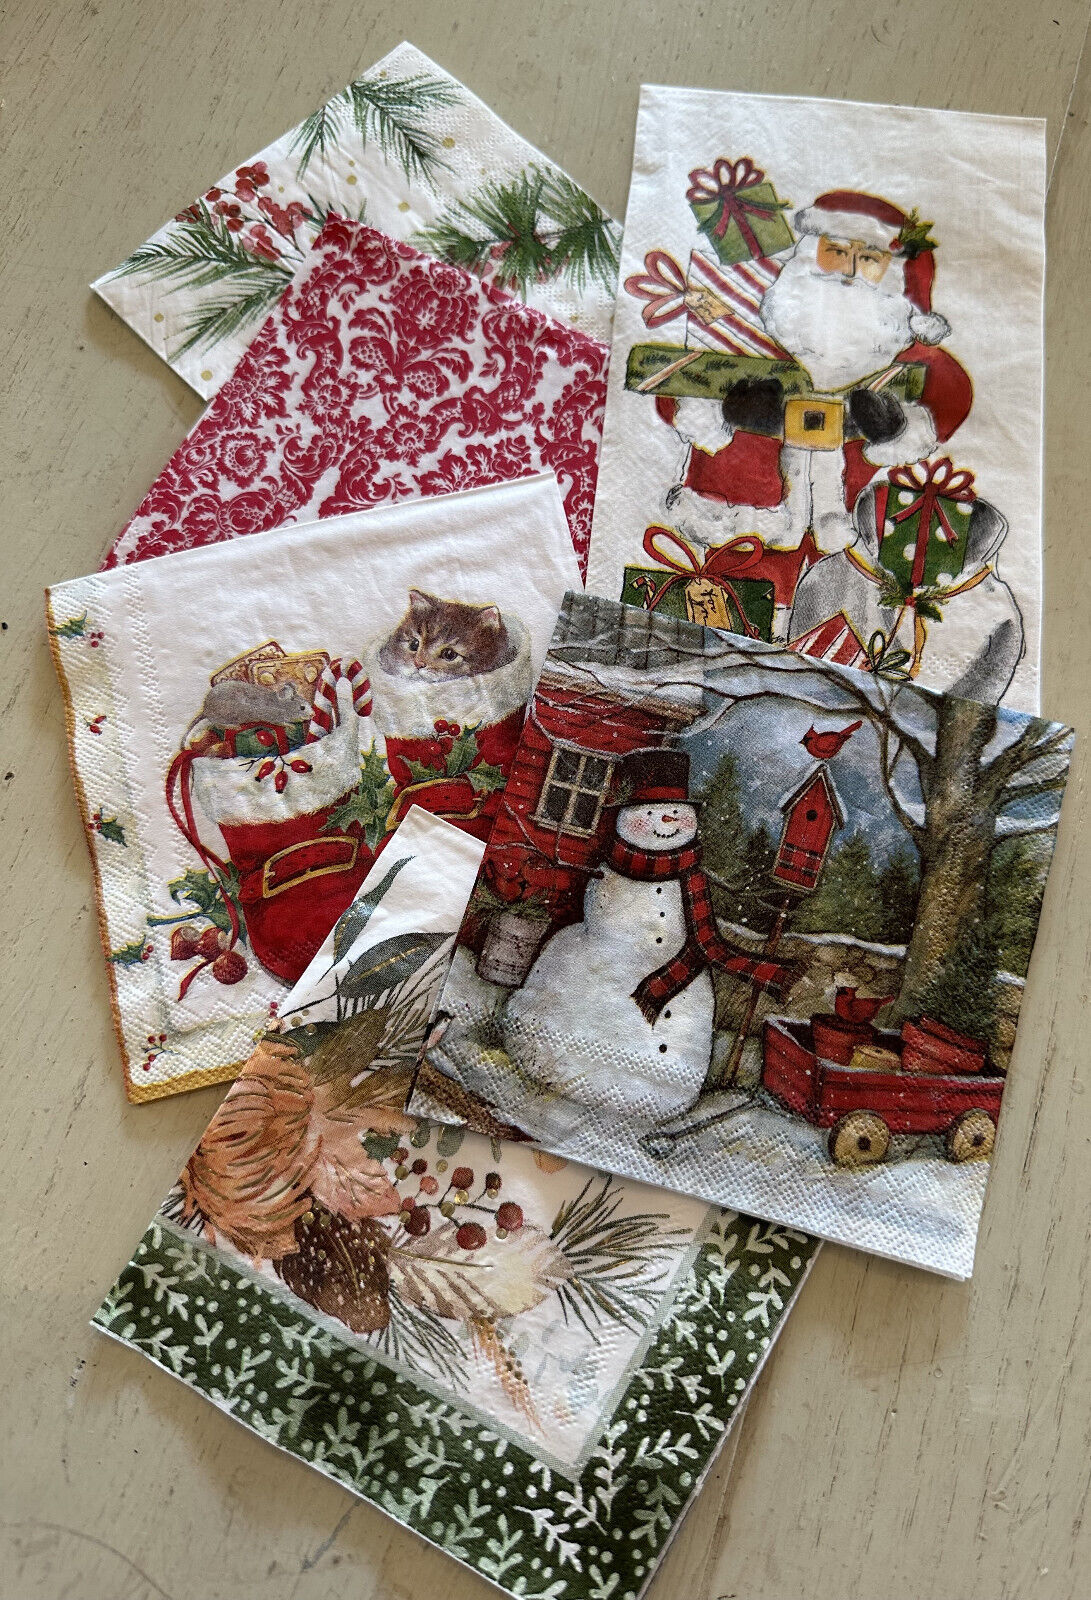 Set of 12 Christmas Holiday Napkins - Decoupage, Junk Journals - Various Designs